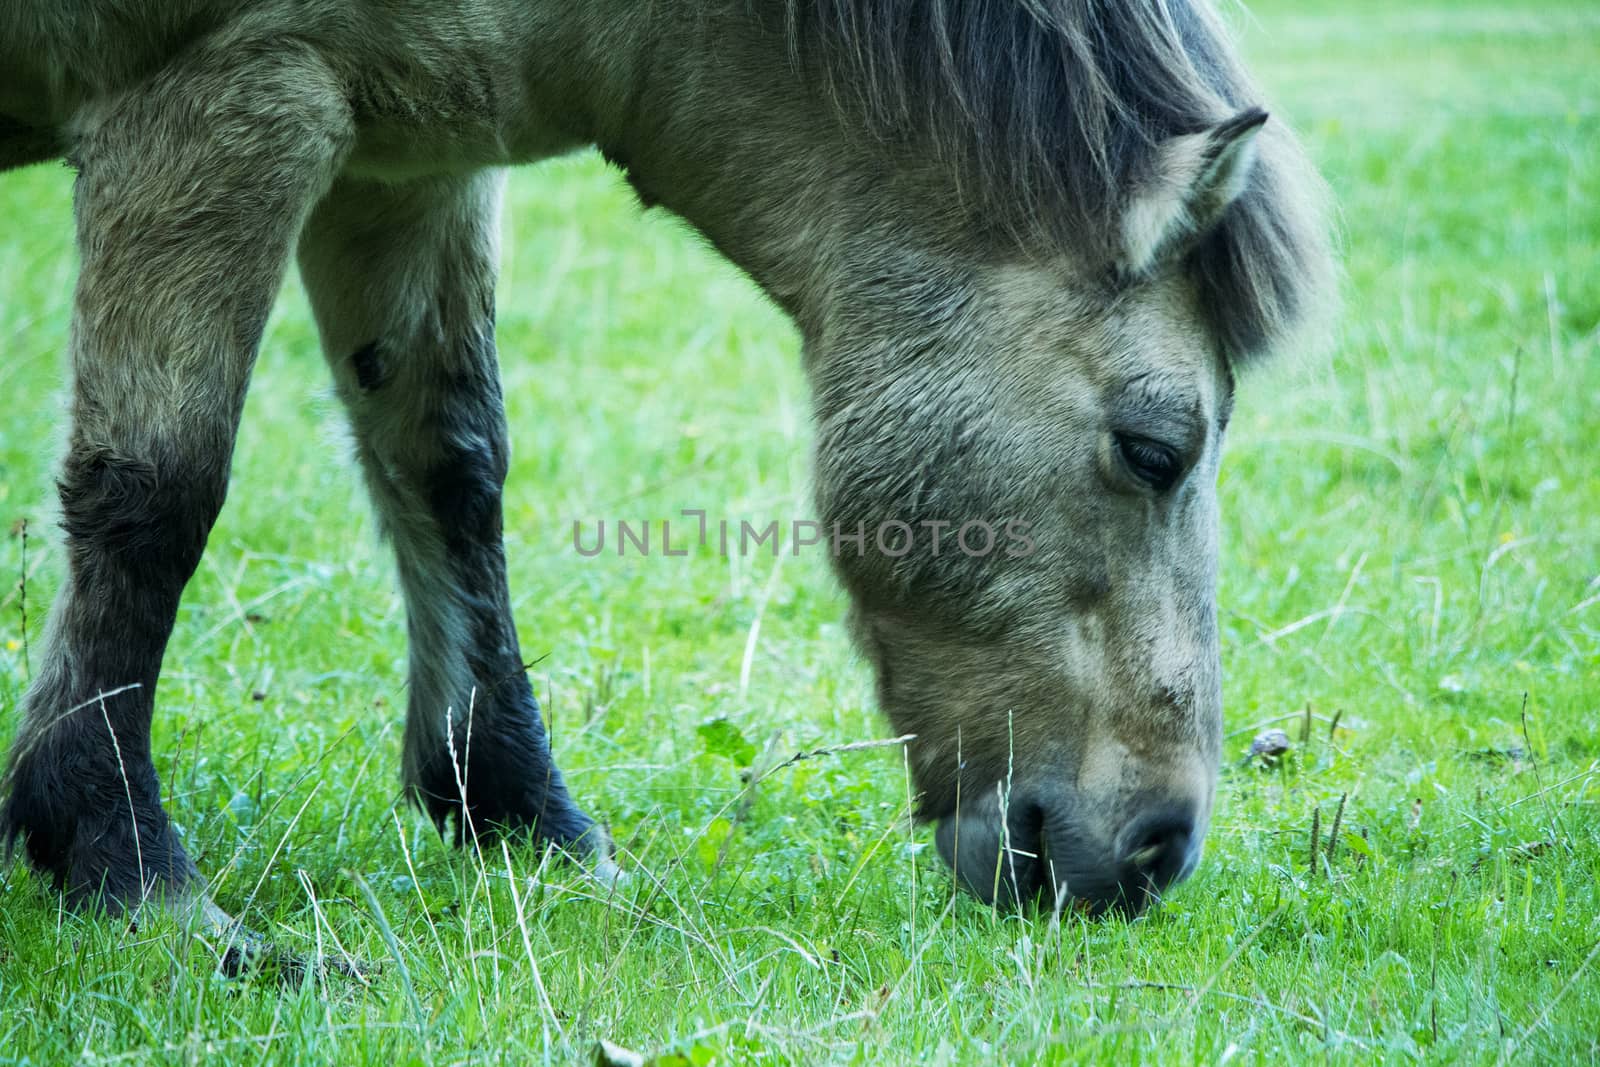 Horse Eating Grass by Mads_Hjorth_Jakobsen